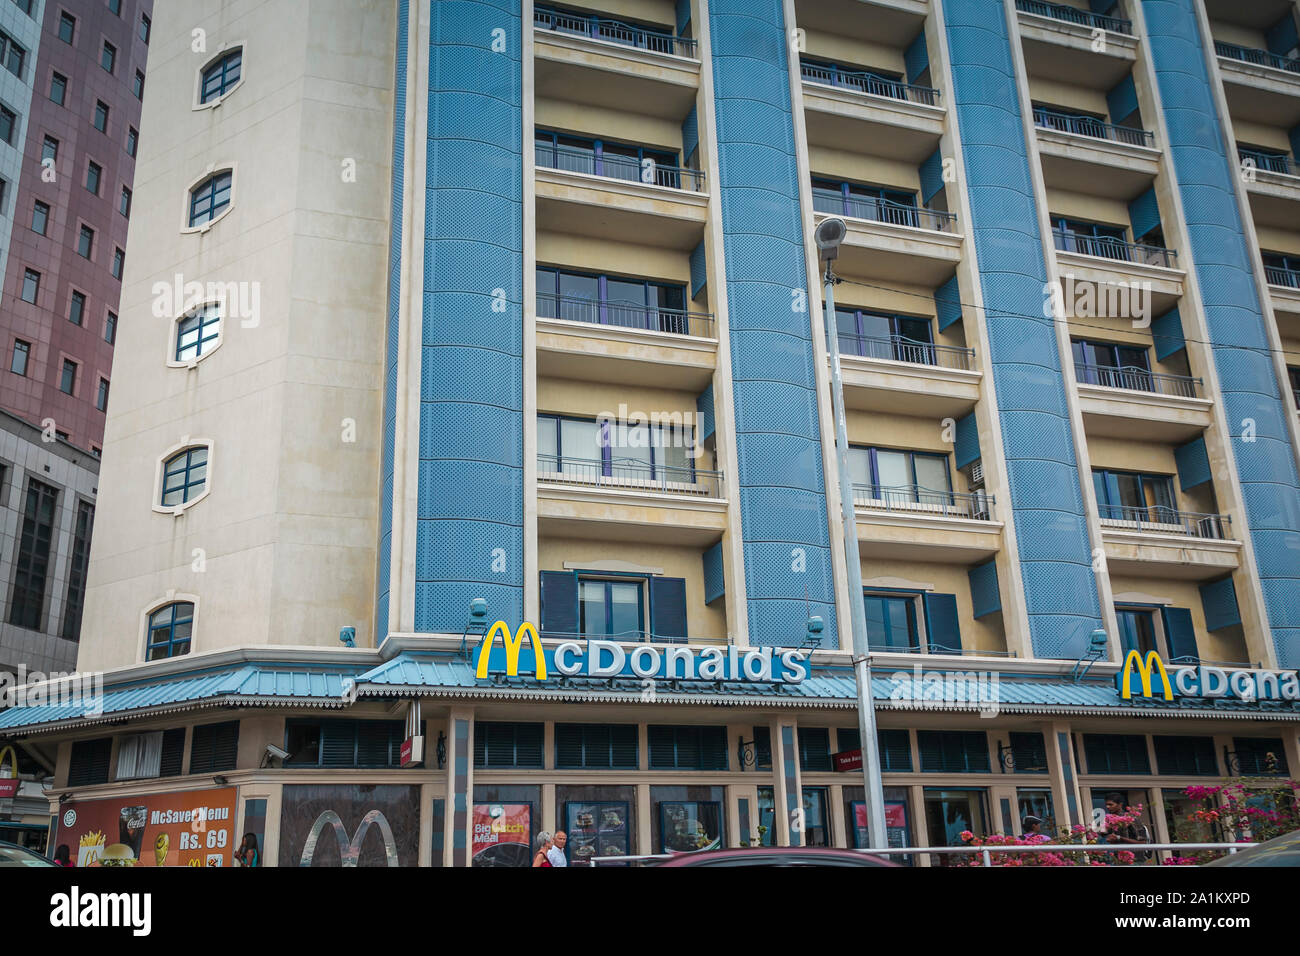 City of Port-Louis, Mauritius - A franchise of McDonald's on the groundfloor of a tall building Stock Photo